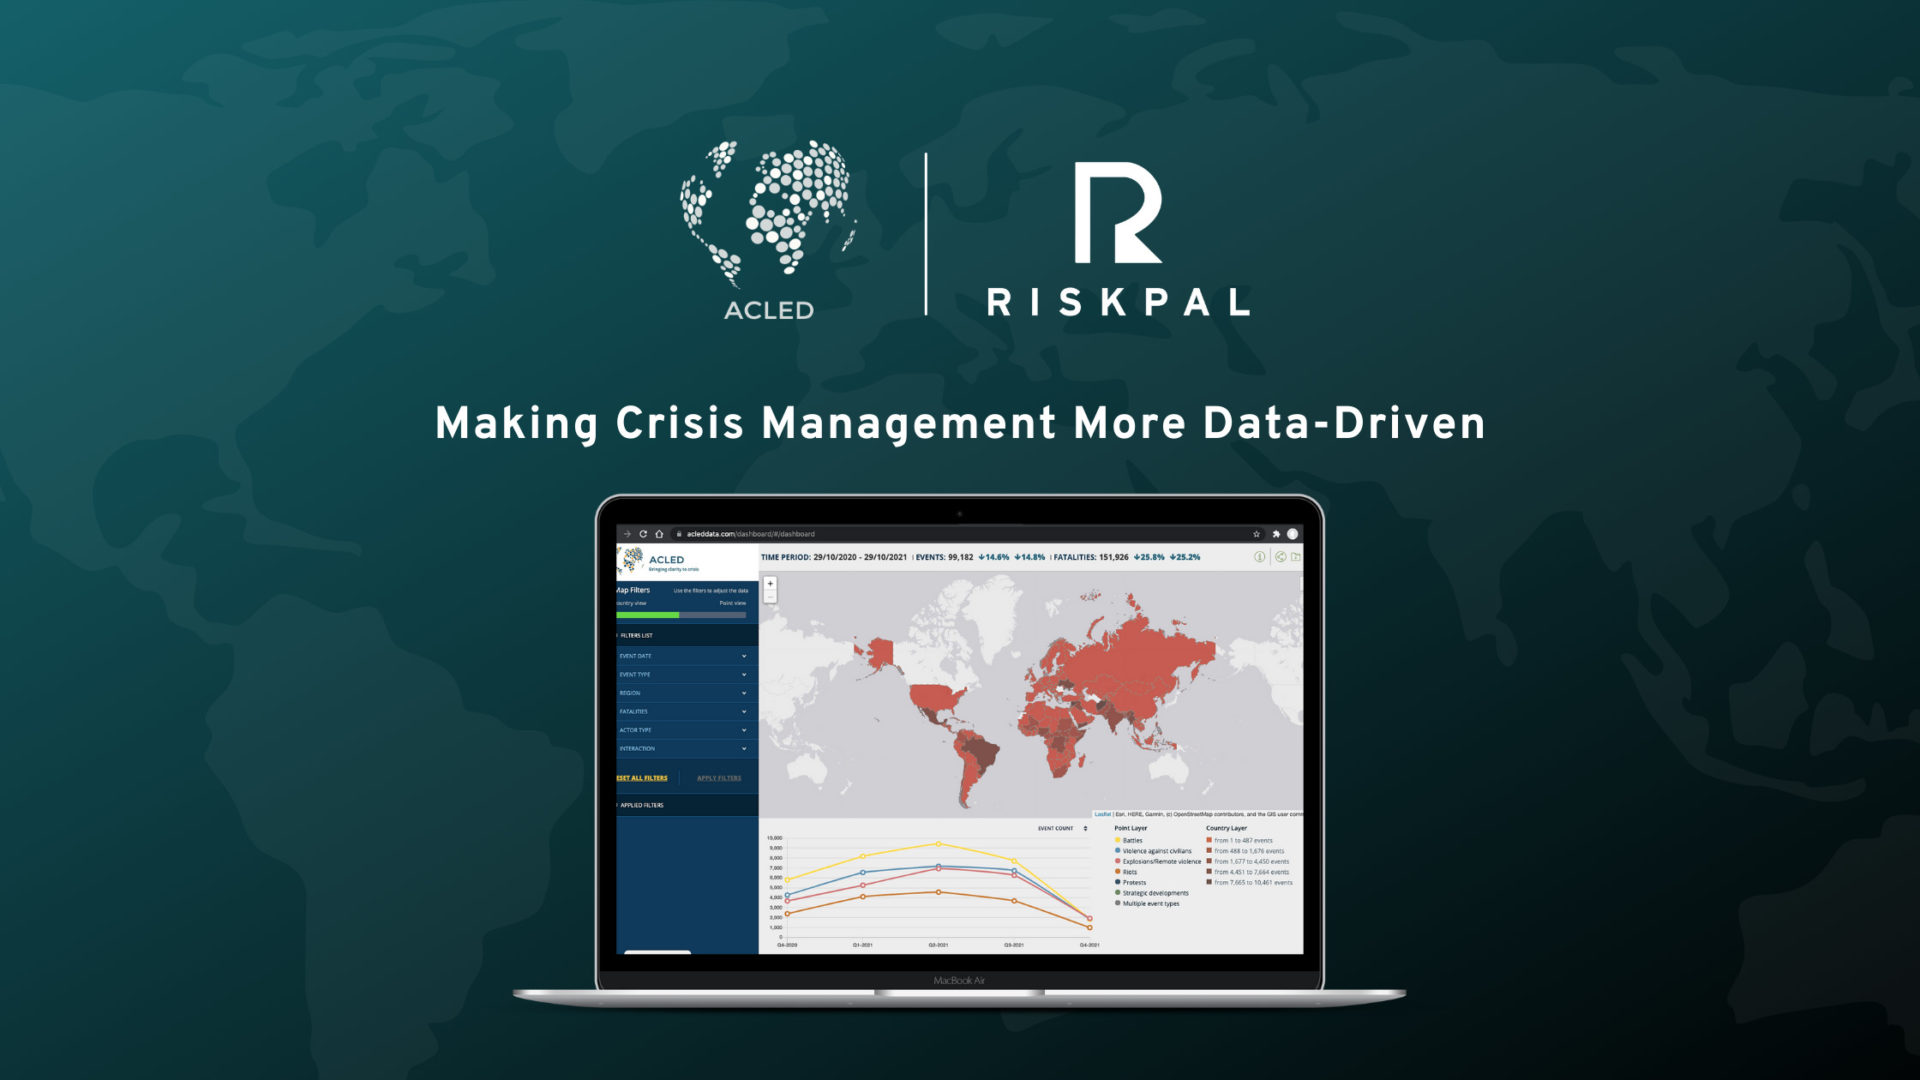 RiskPal Partners with ACLED for Data-Driven Crisis Management